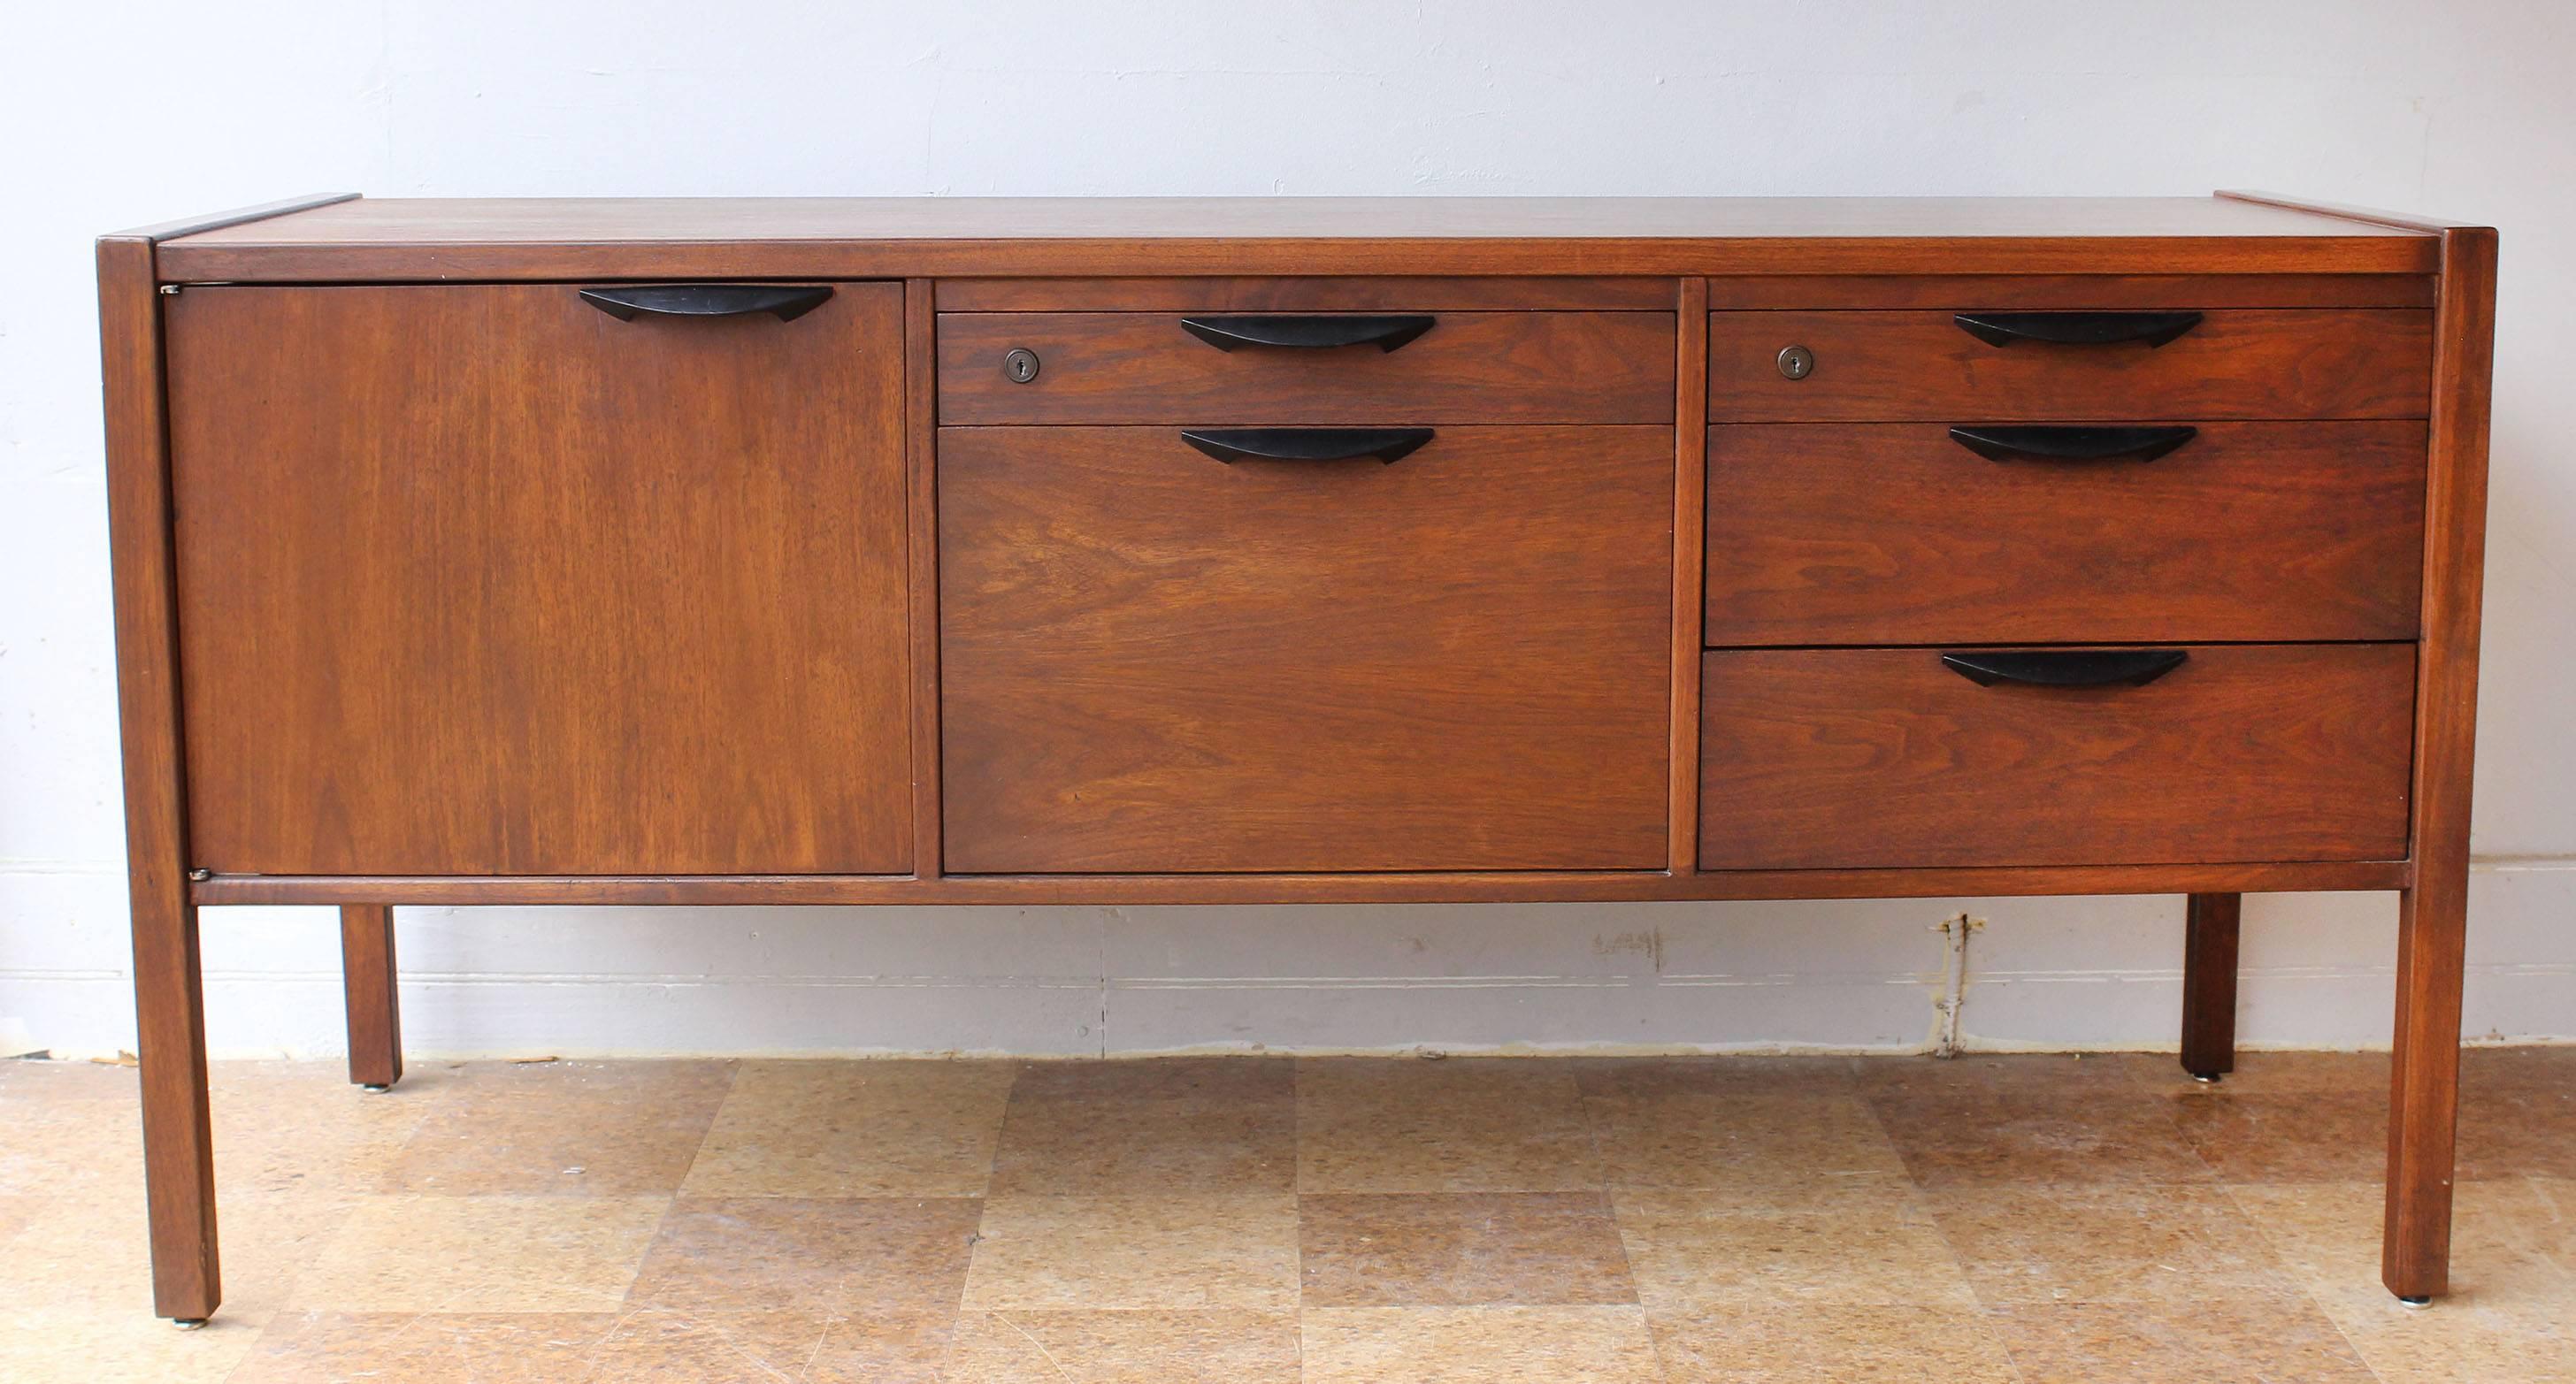 A pair of teak credenzas with enameled metal pulls designed by Jens Risom.

complementary shipping within 30 miles.